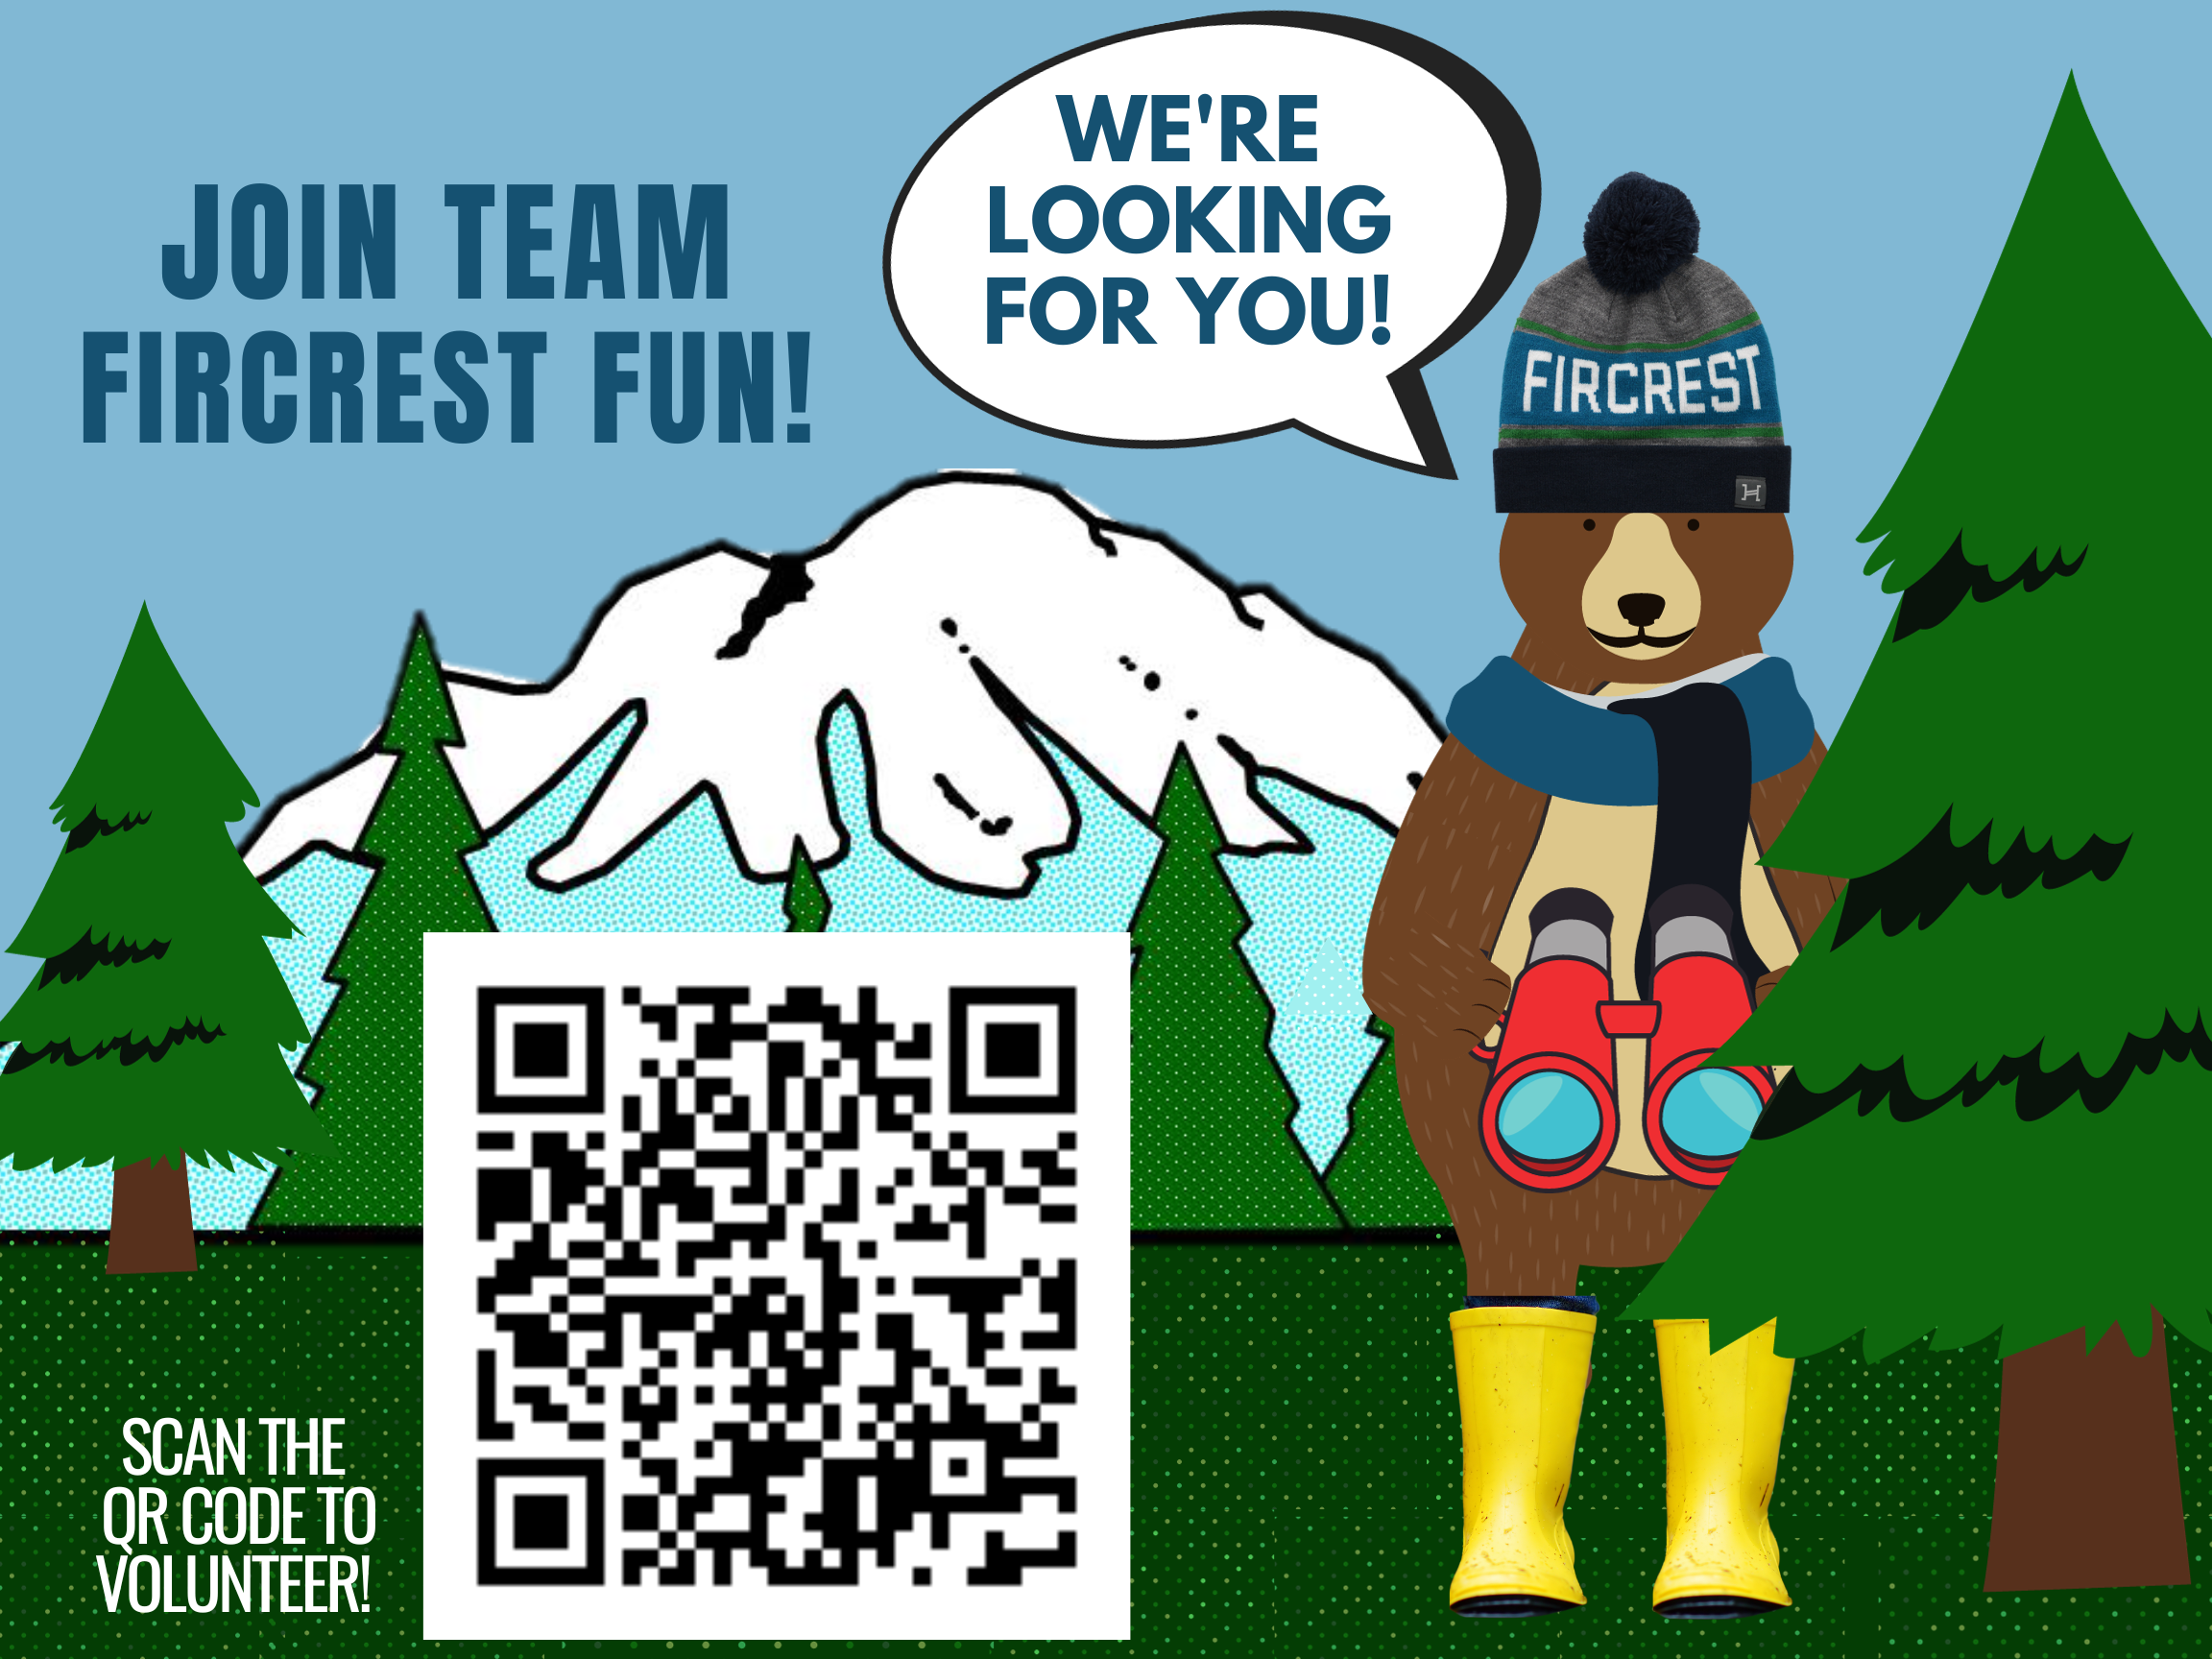 Join Team Fircrest Fun - We're looking for you! Murphy the bear in a Fircrest beanie with binoculars looking for volunteers with the Fircrest logo and a QR code saying scan the QR code to volunteer